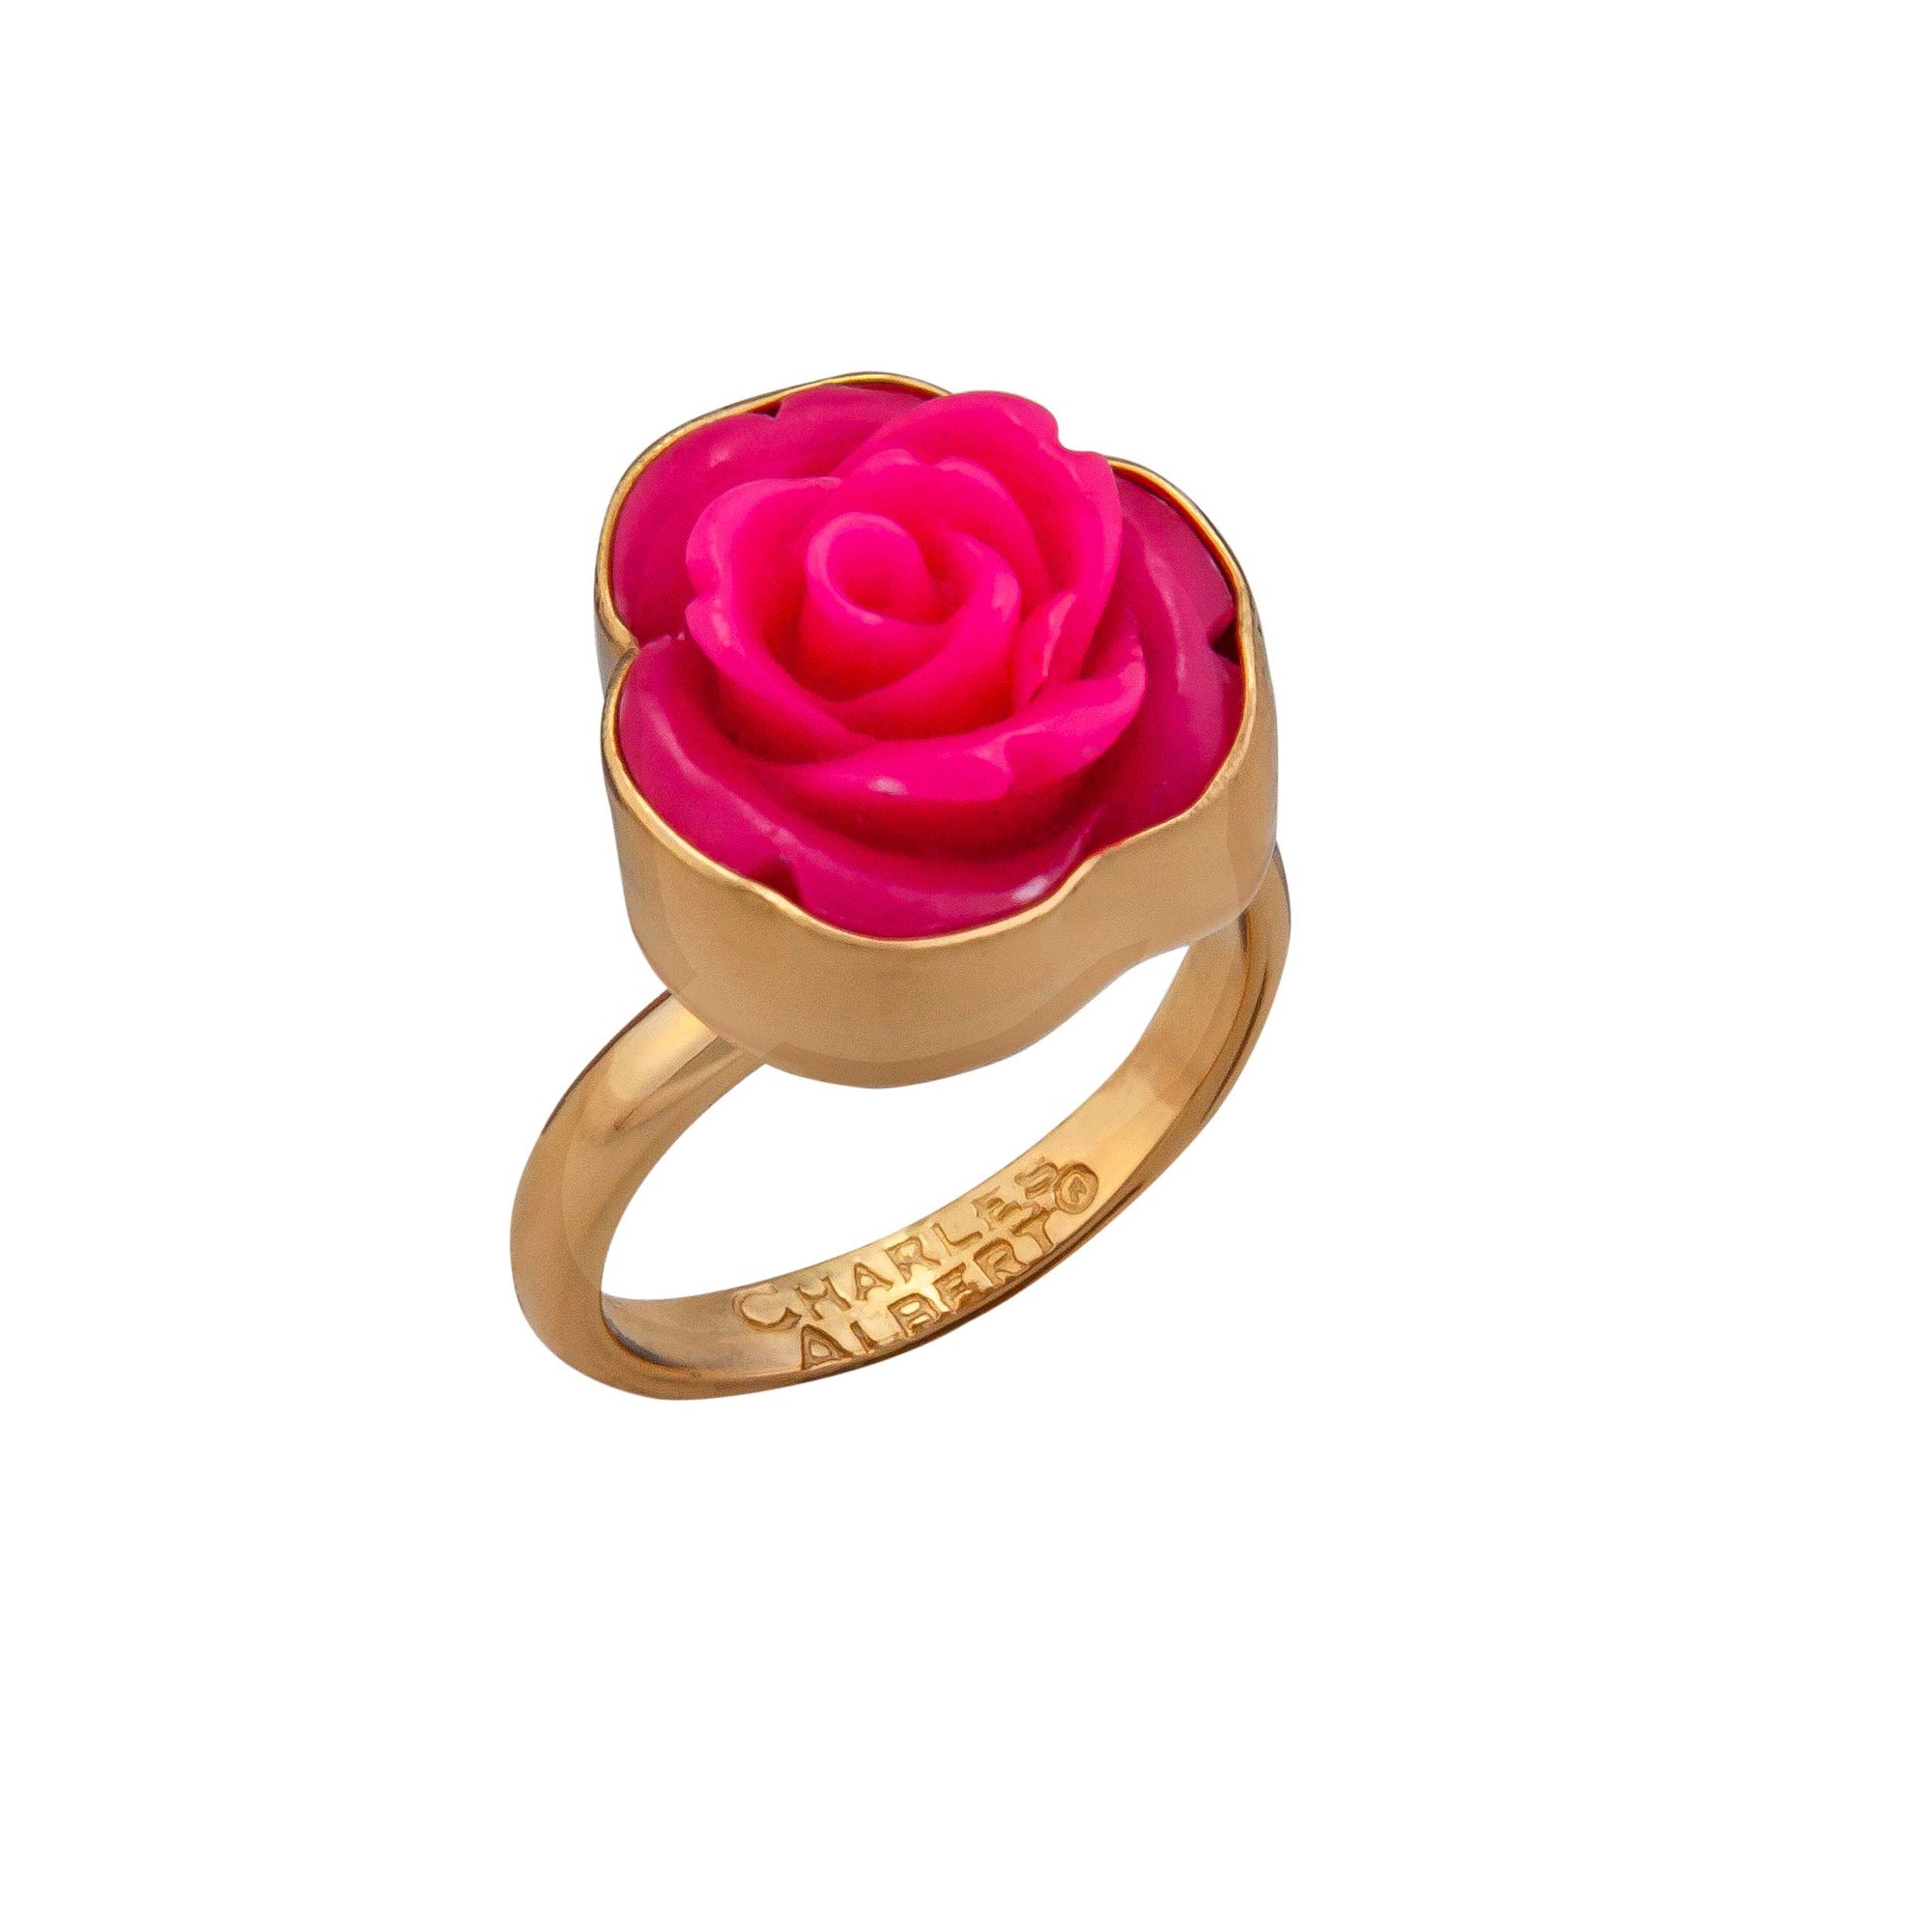 Alchemia Pink Resin Rose Adjustable Ring